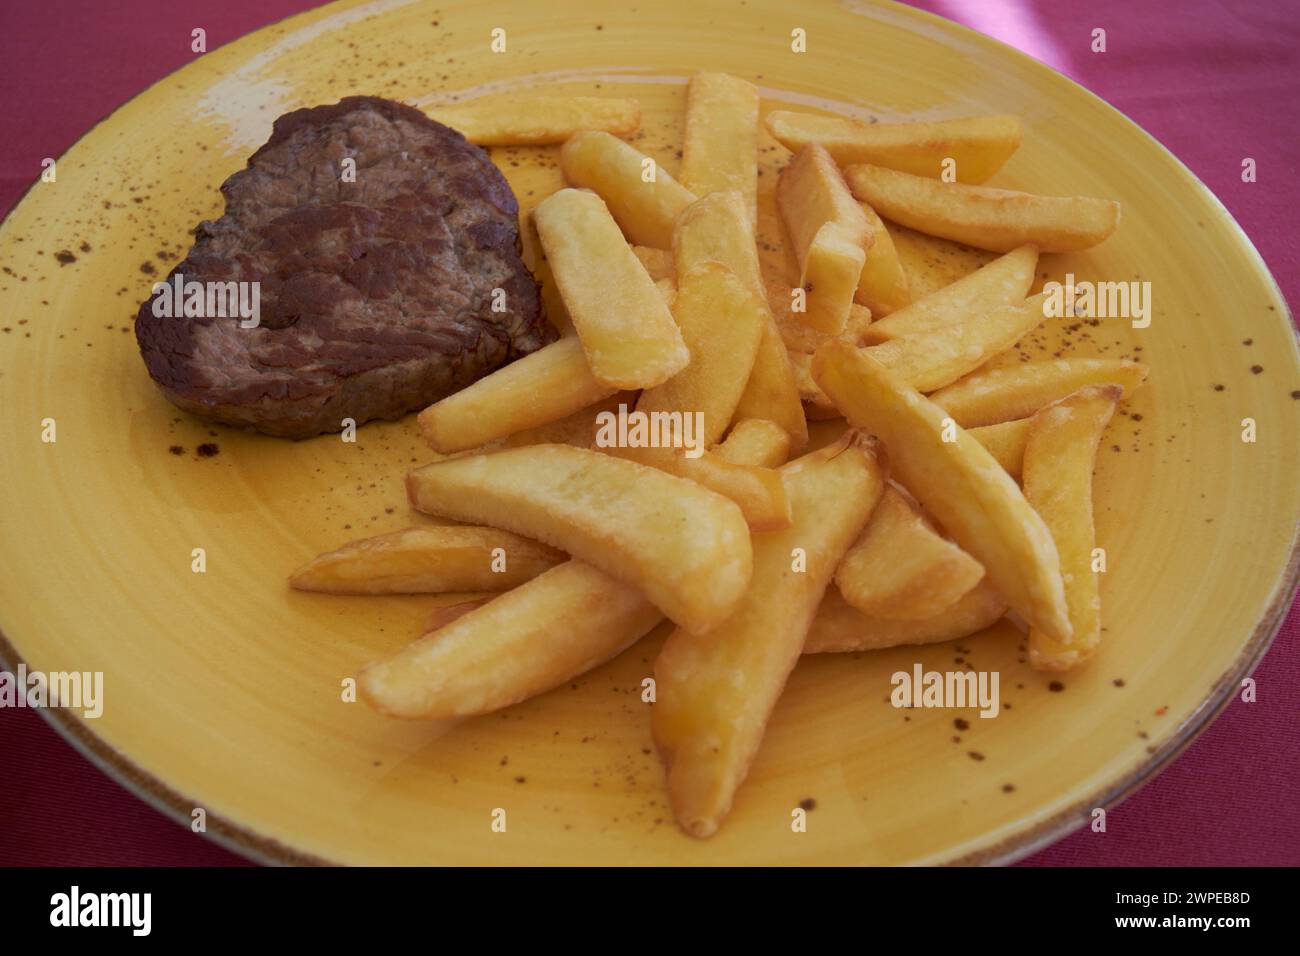 childs portion meal of steak and chips Costa Teguise, Lanzarote, Canary Islands, spain Stock Photo